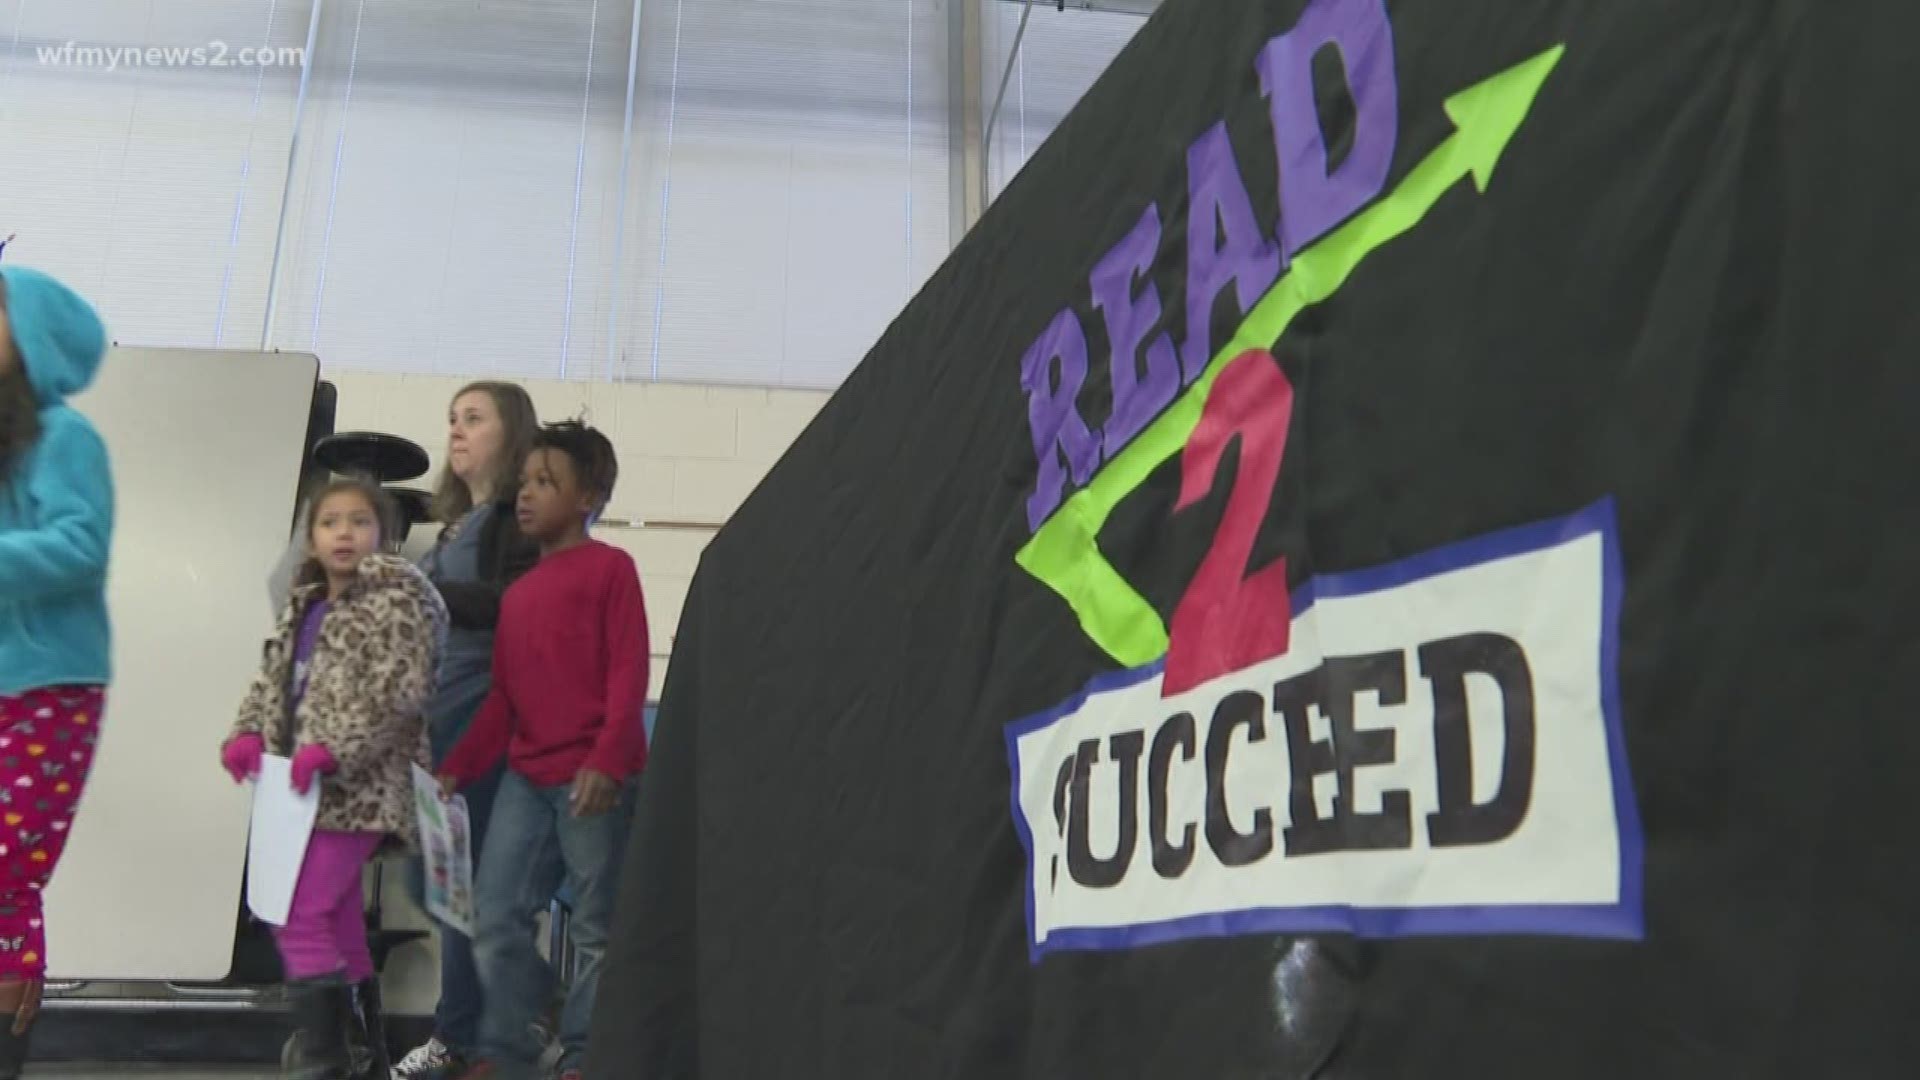 The Good Morning Show team took its latest Read 2 Succeed adventure to Allen Jay Elementary in High Point